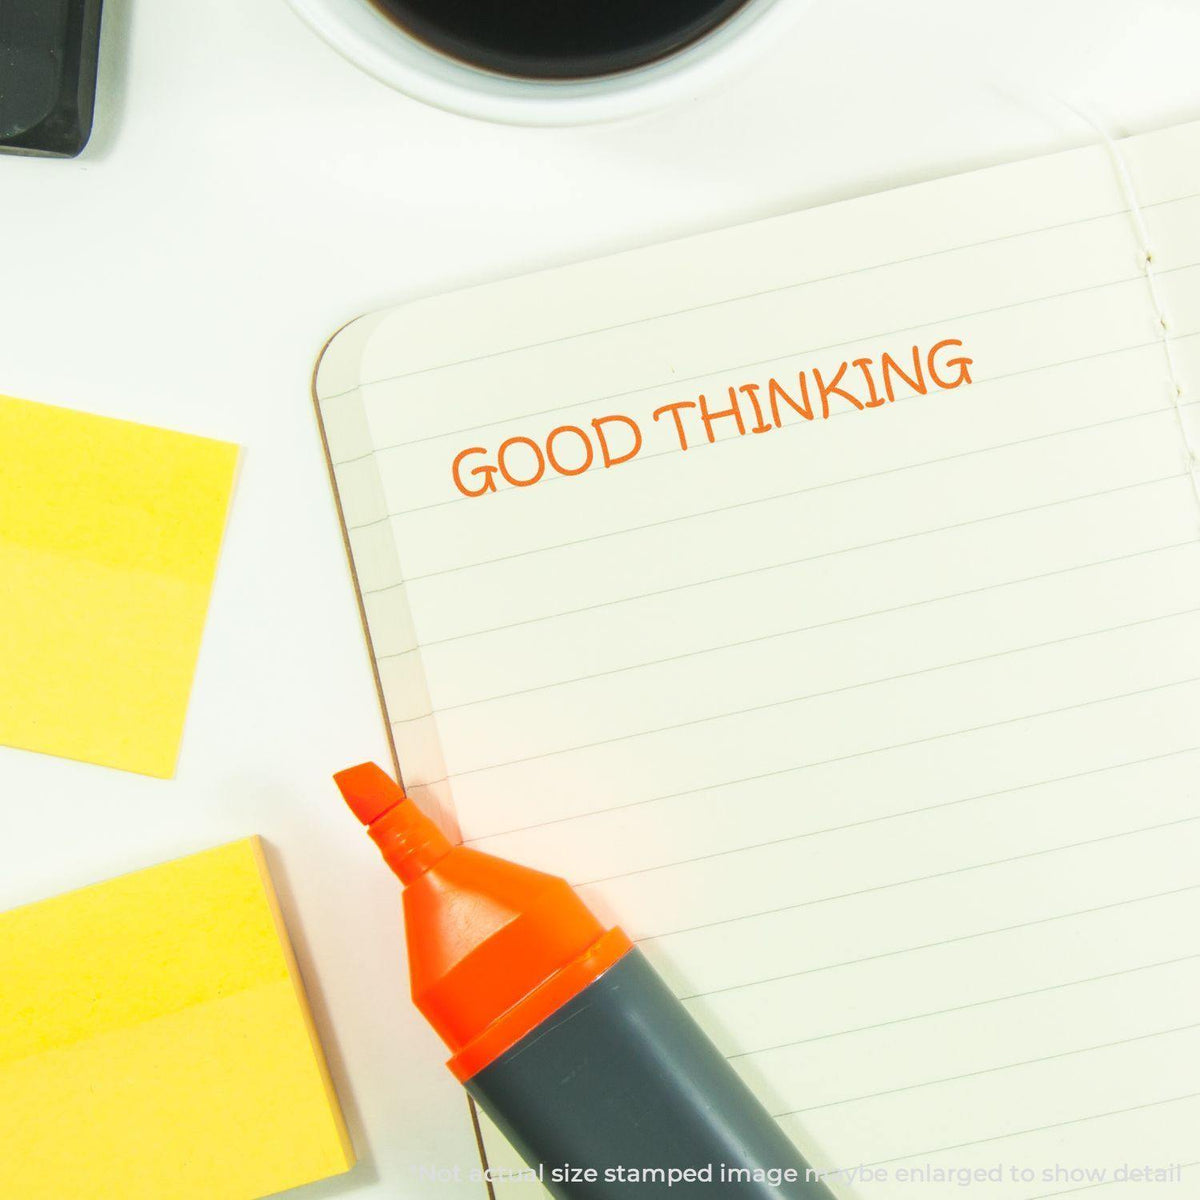 Good Thinking Rubber Stamp In Use Photo